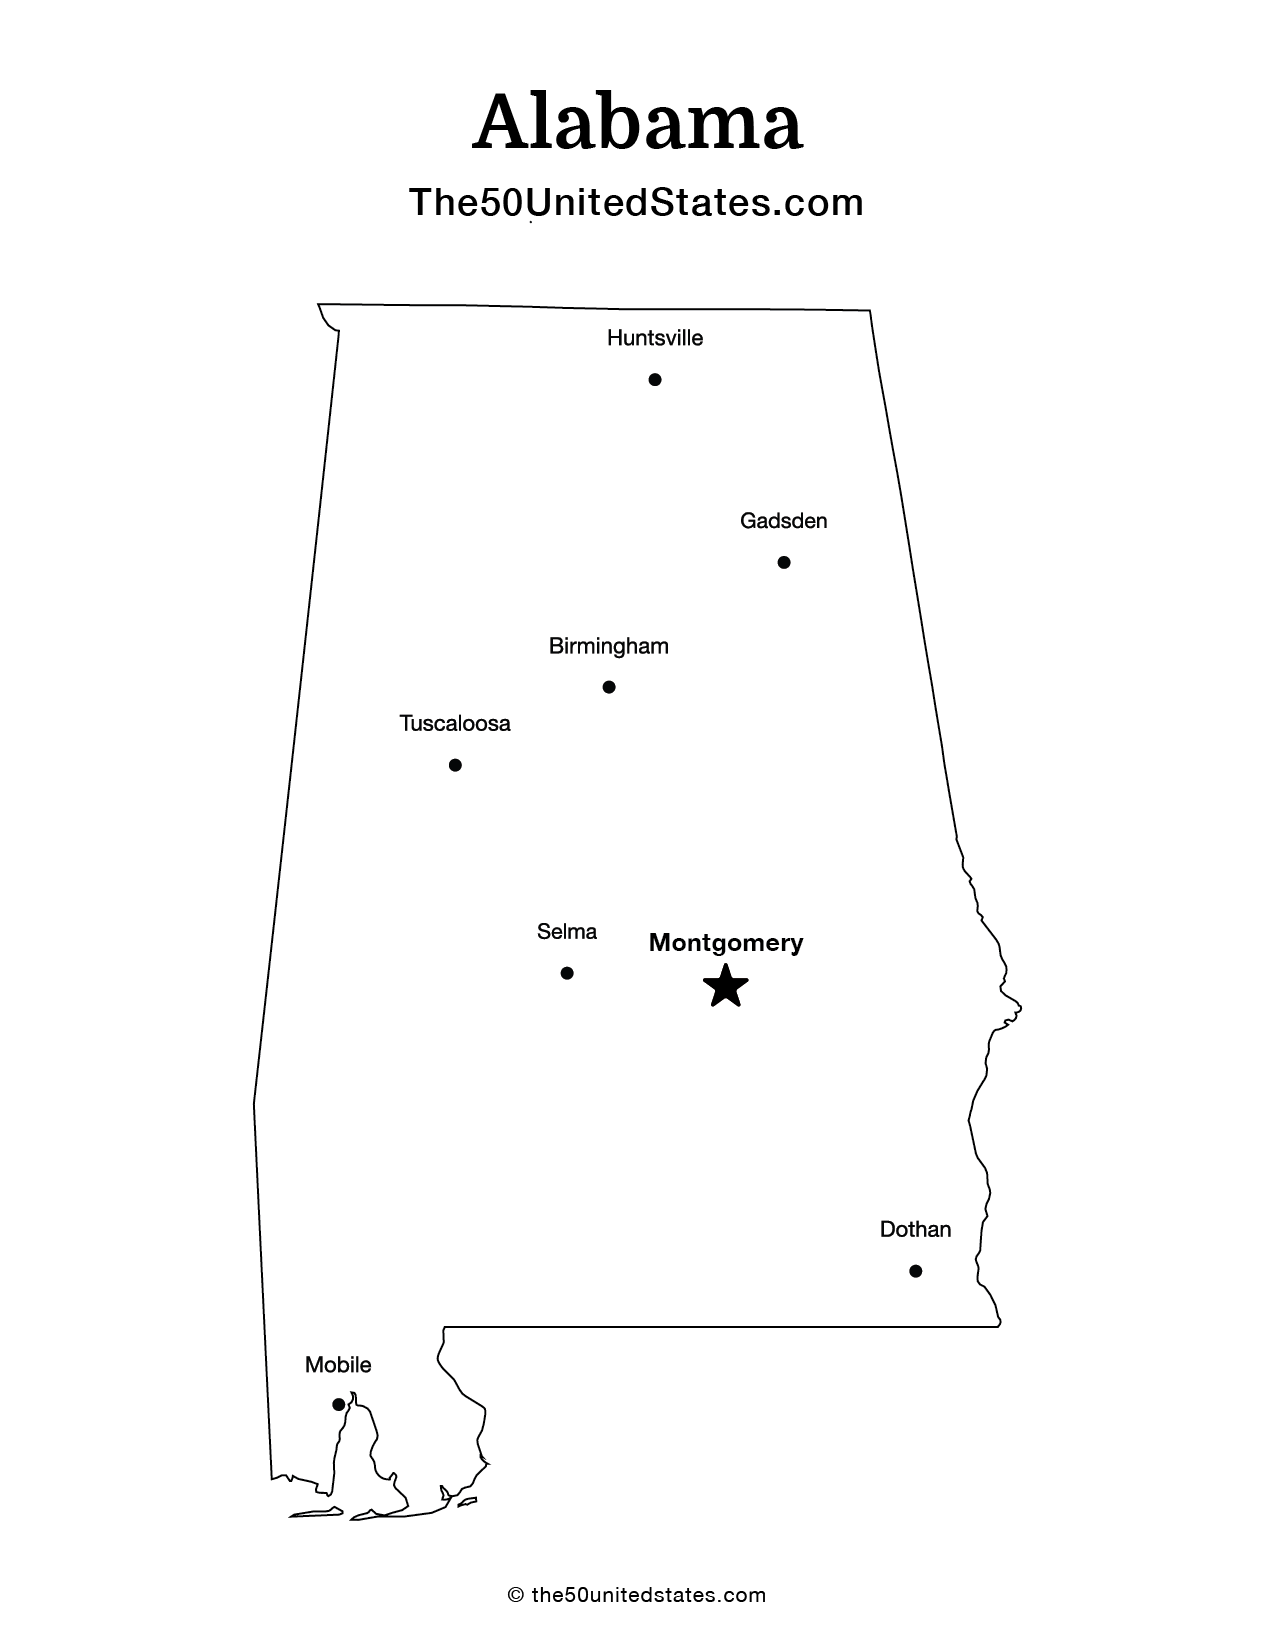 Alabama with Cities (Labeled)